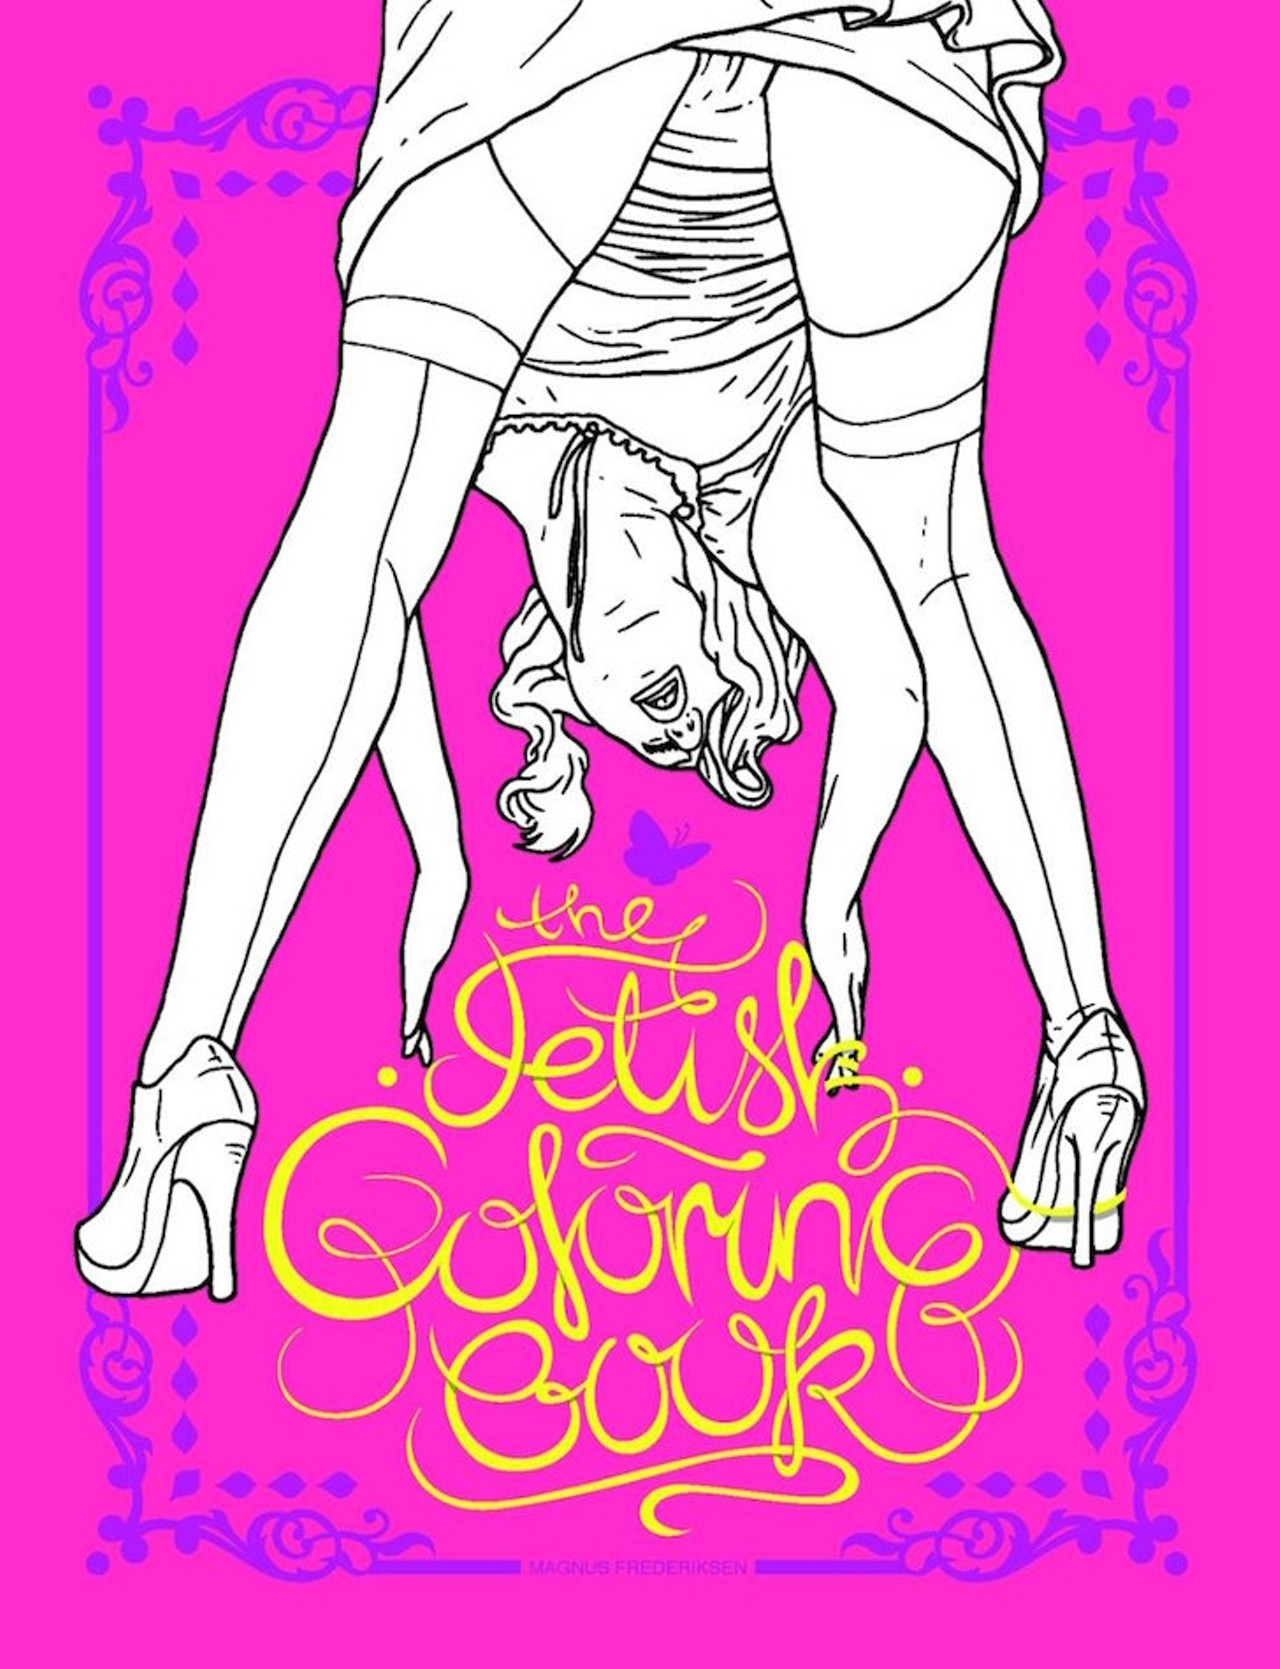 The Fetish Coloring Book
For that special friend
Buy it at amazon.com 